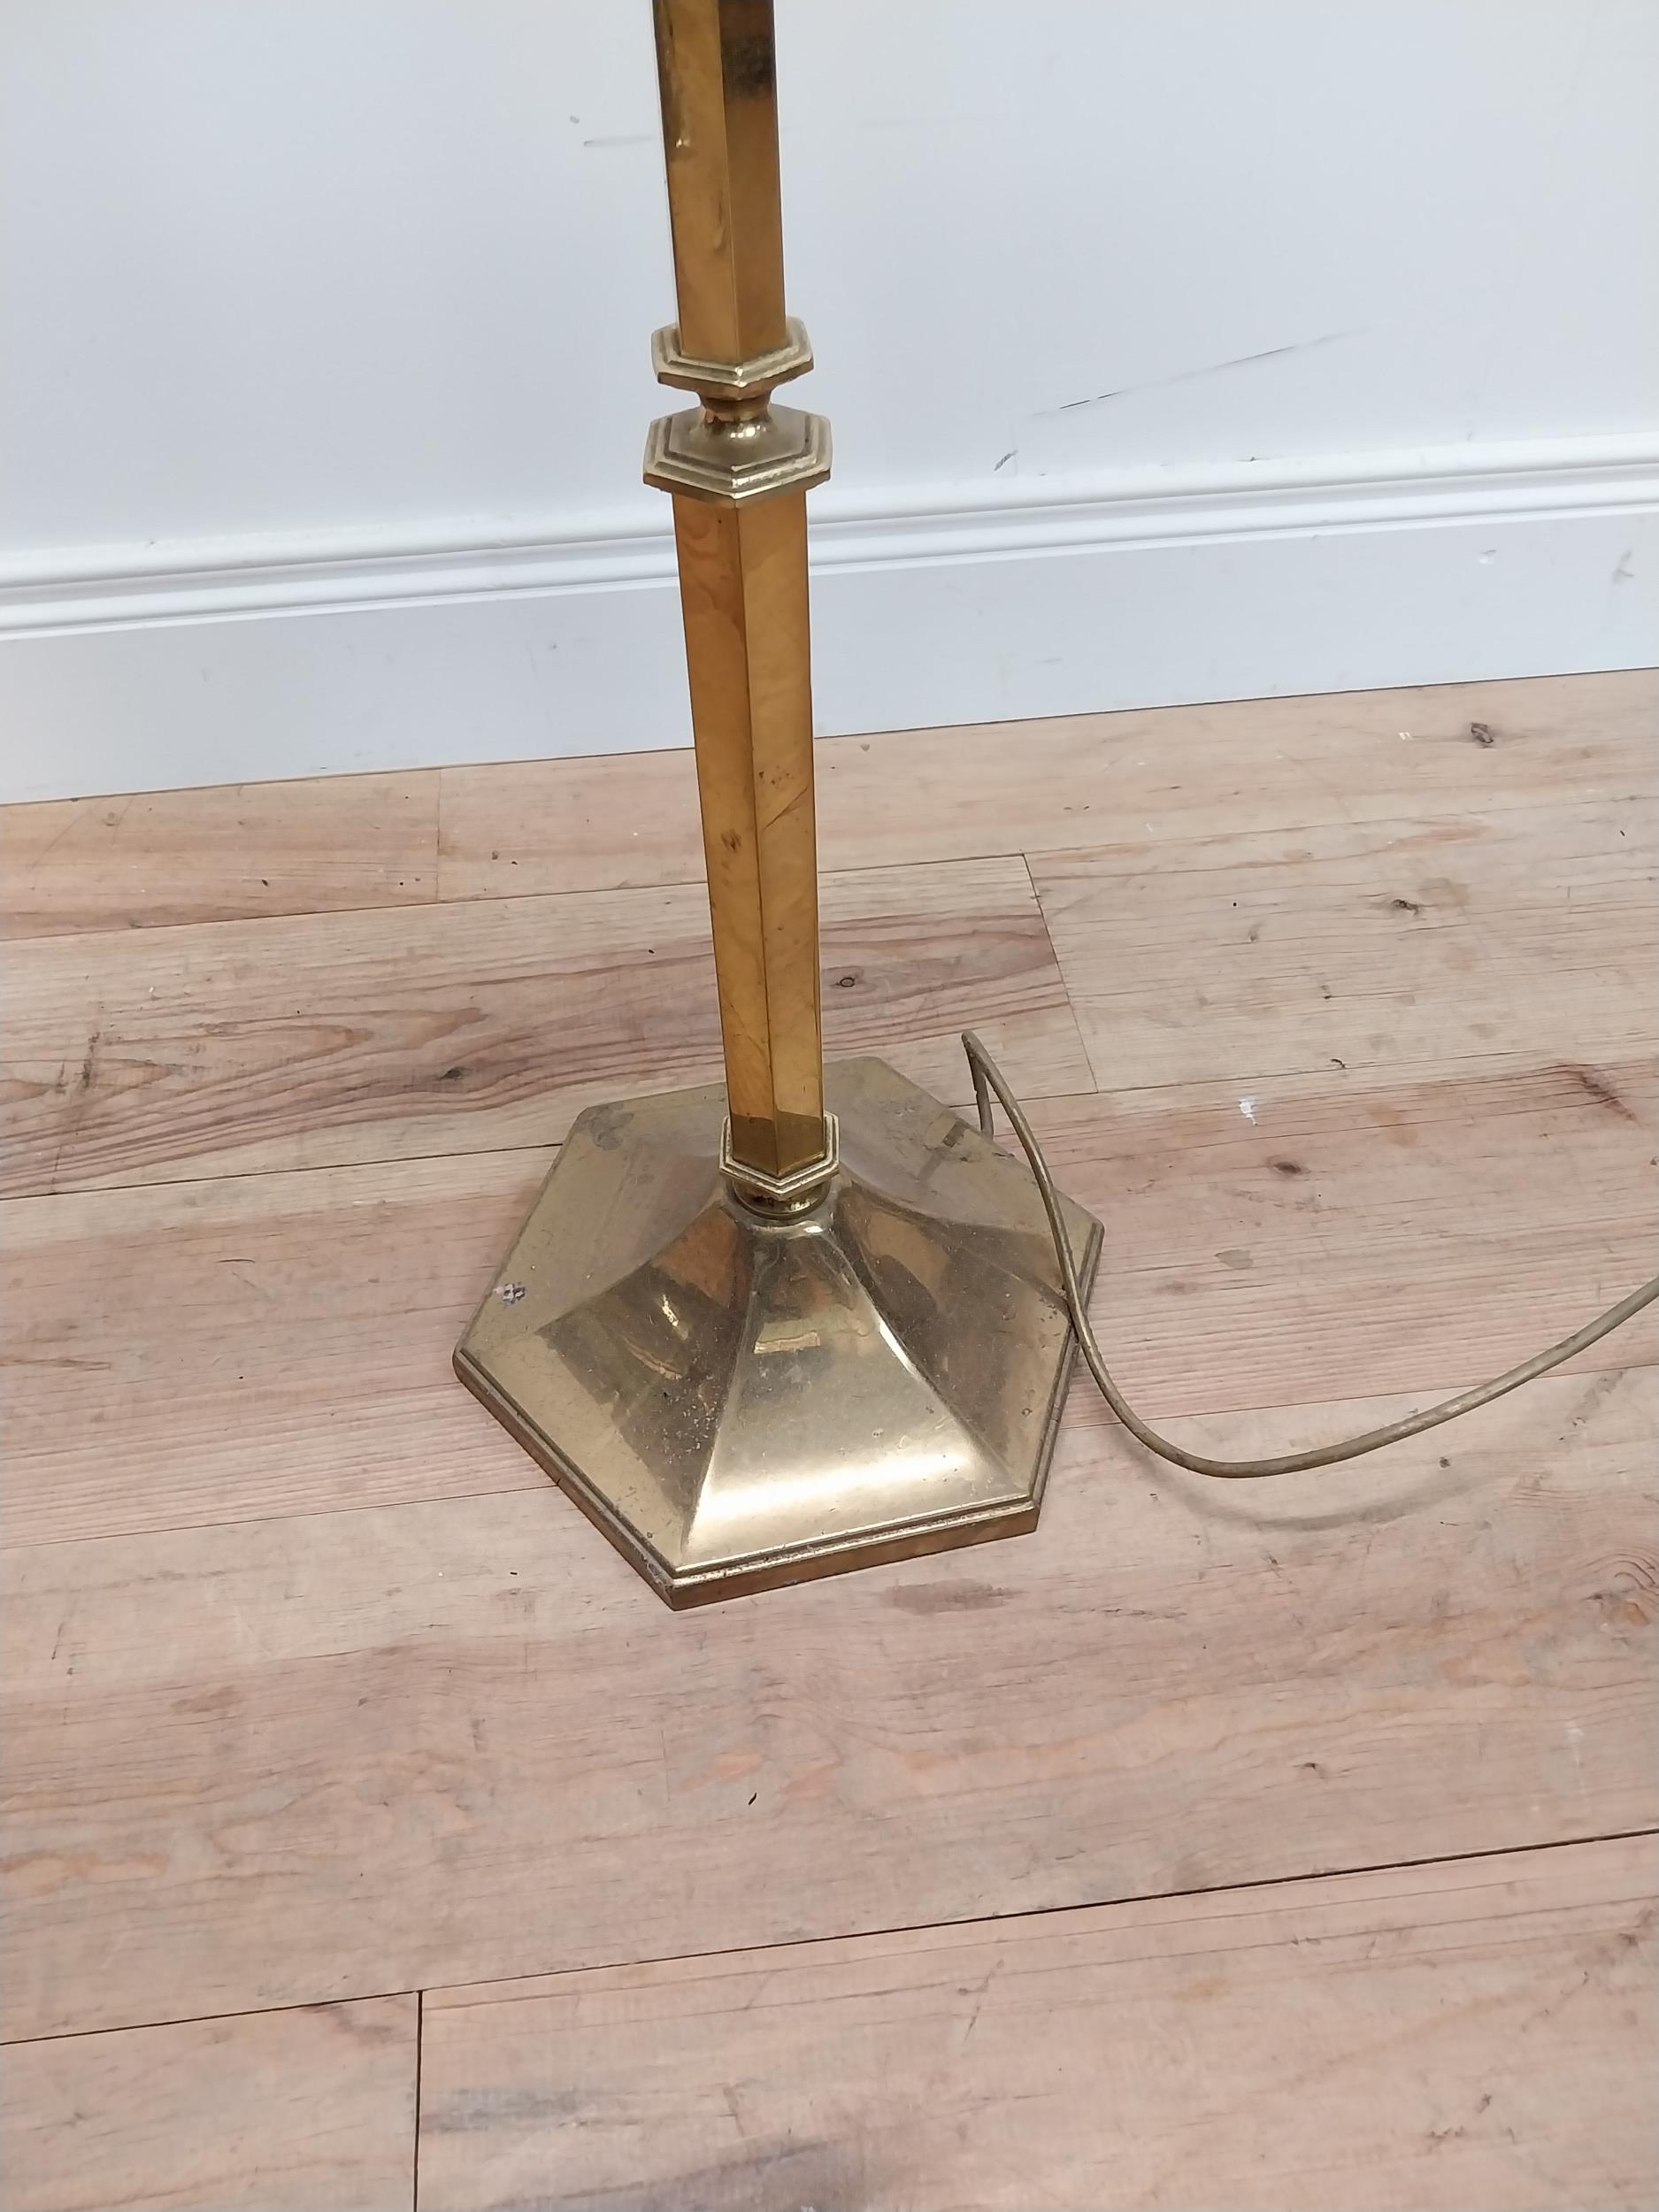 Edwardian brass standard lamp with cloth shade {140 cm H x 40 cm Dia.}. - Image 2 of 3